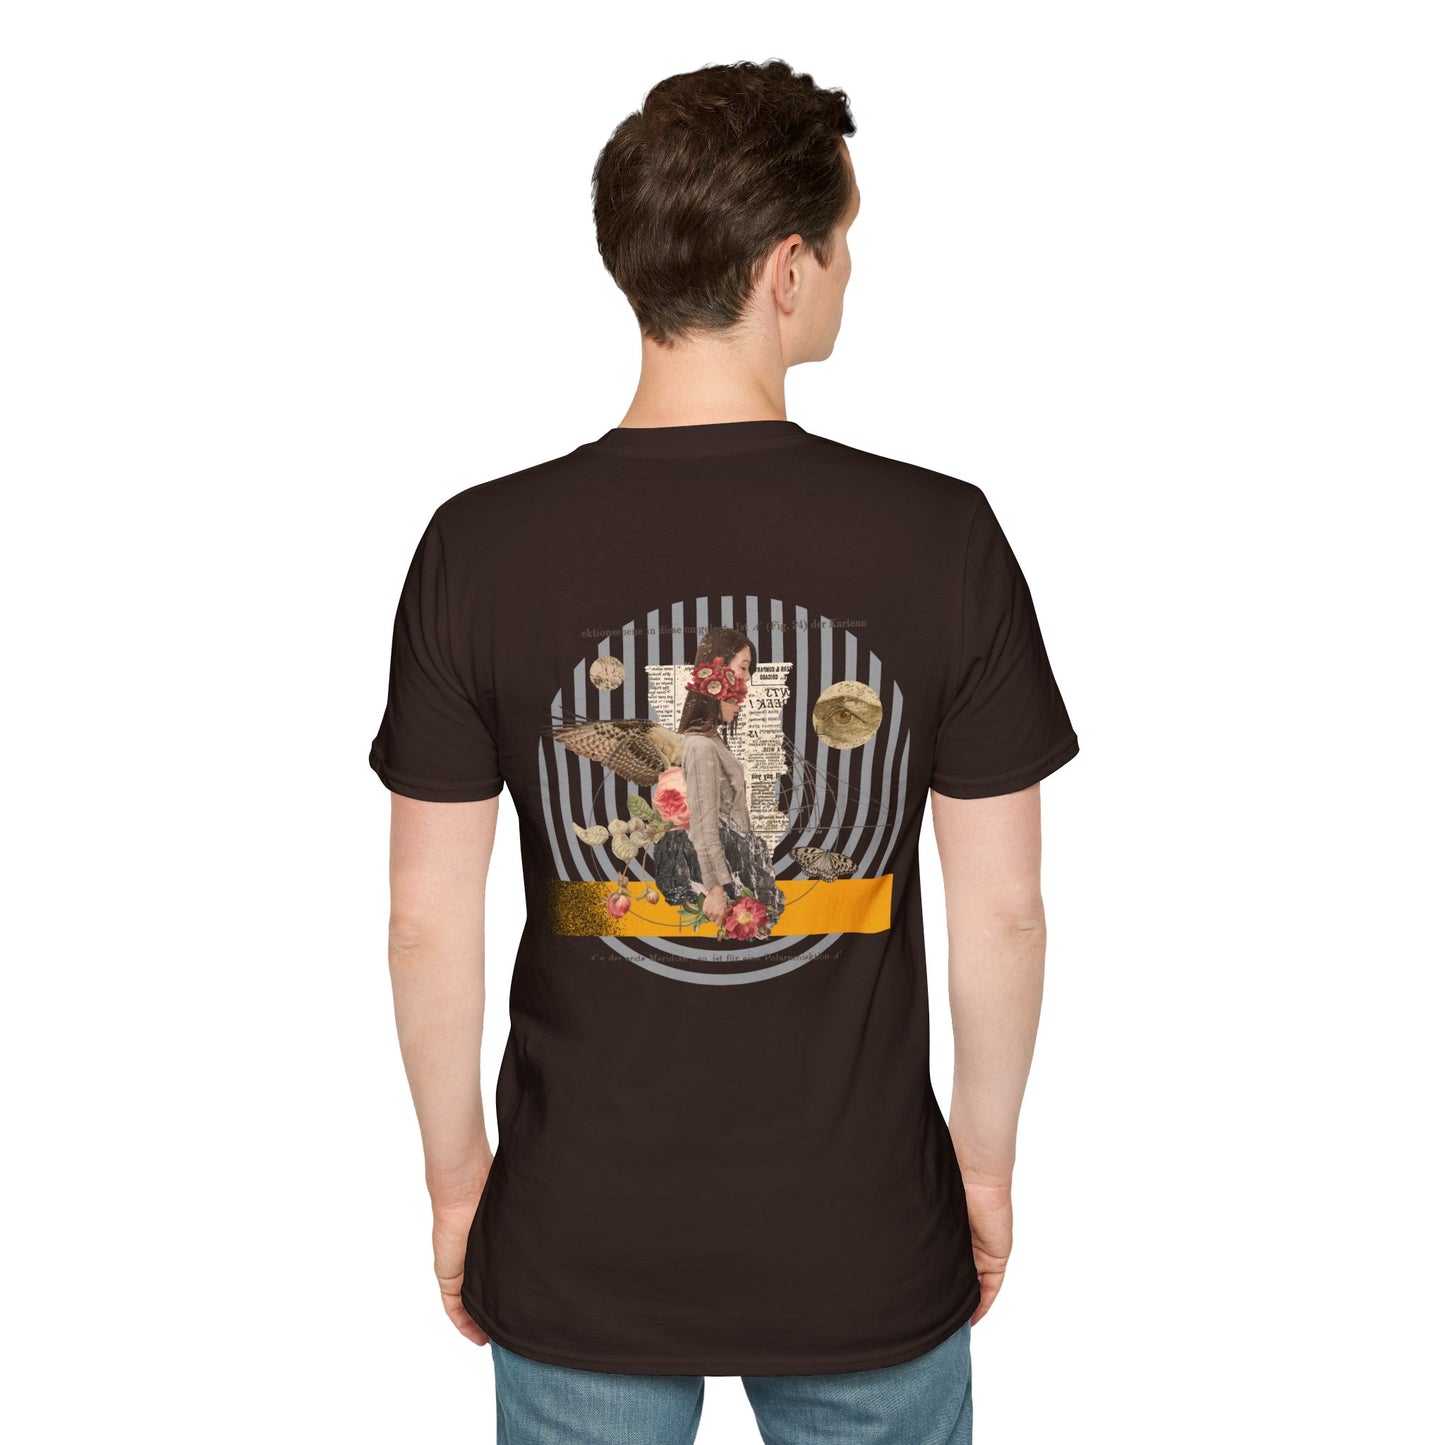 Brown T-shirt with a mysterious figure surrounded by butterflies and roses, with newspaper clippings and black stripes